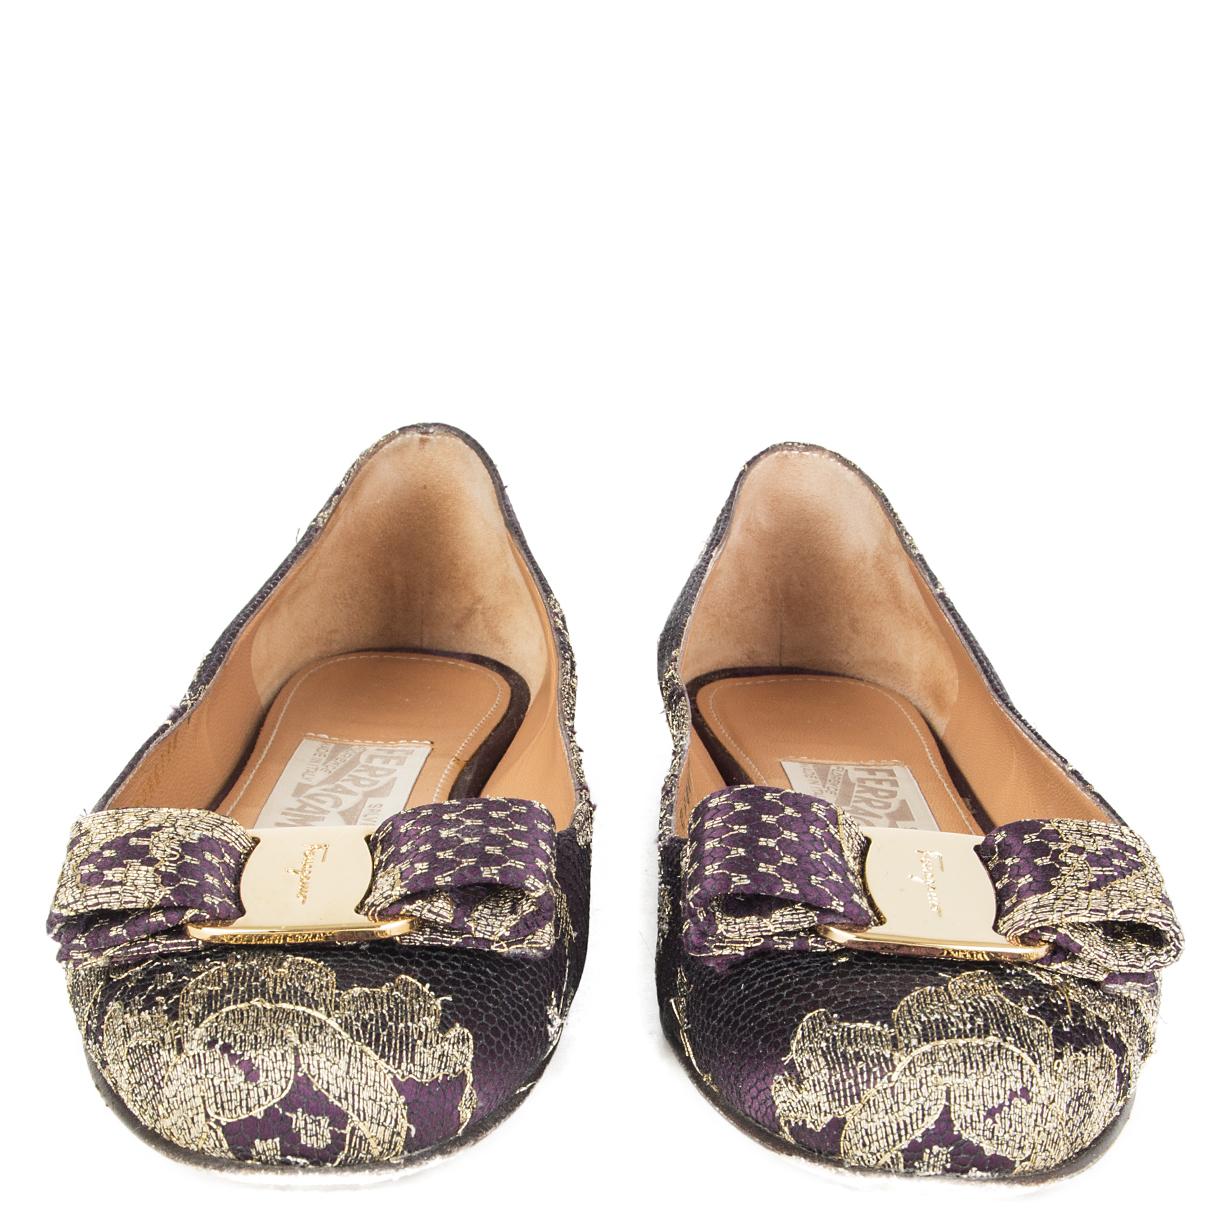 100% authentic Salvatore Ferragamo 'Varina' flats in purple satin covered in metallic lurex lace. Haver been worn and are in excellent condition. 

Measurements
Imprinted Size	35
Shoe Size	35
Inside Sole	22cm (8.6in)
Width	7cm (2.7in)

All our